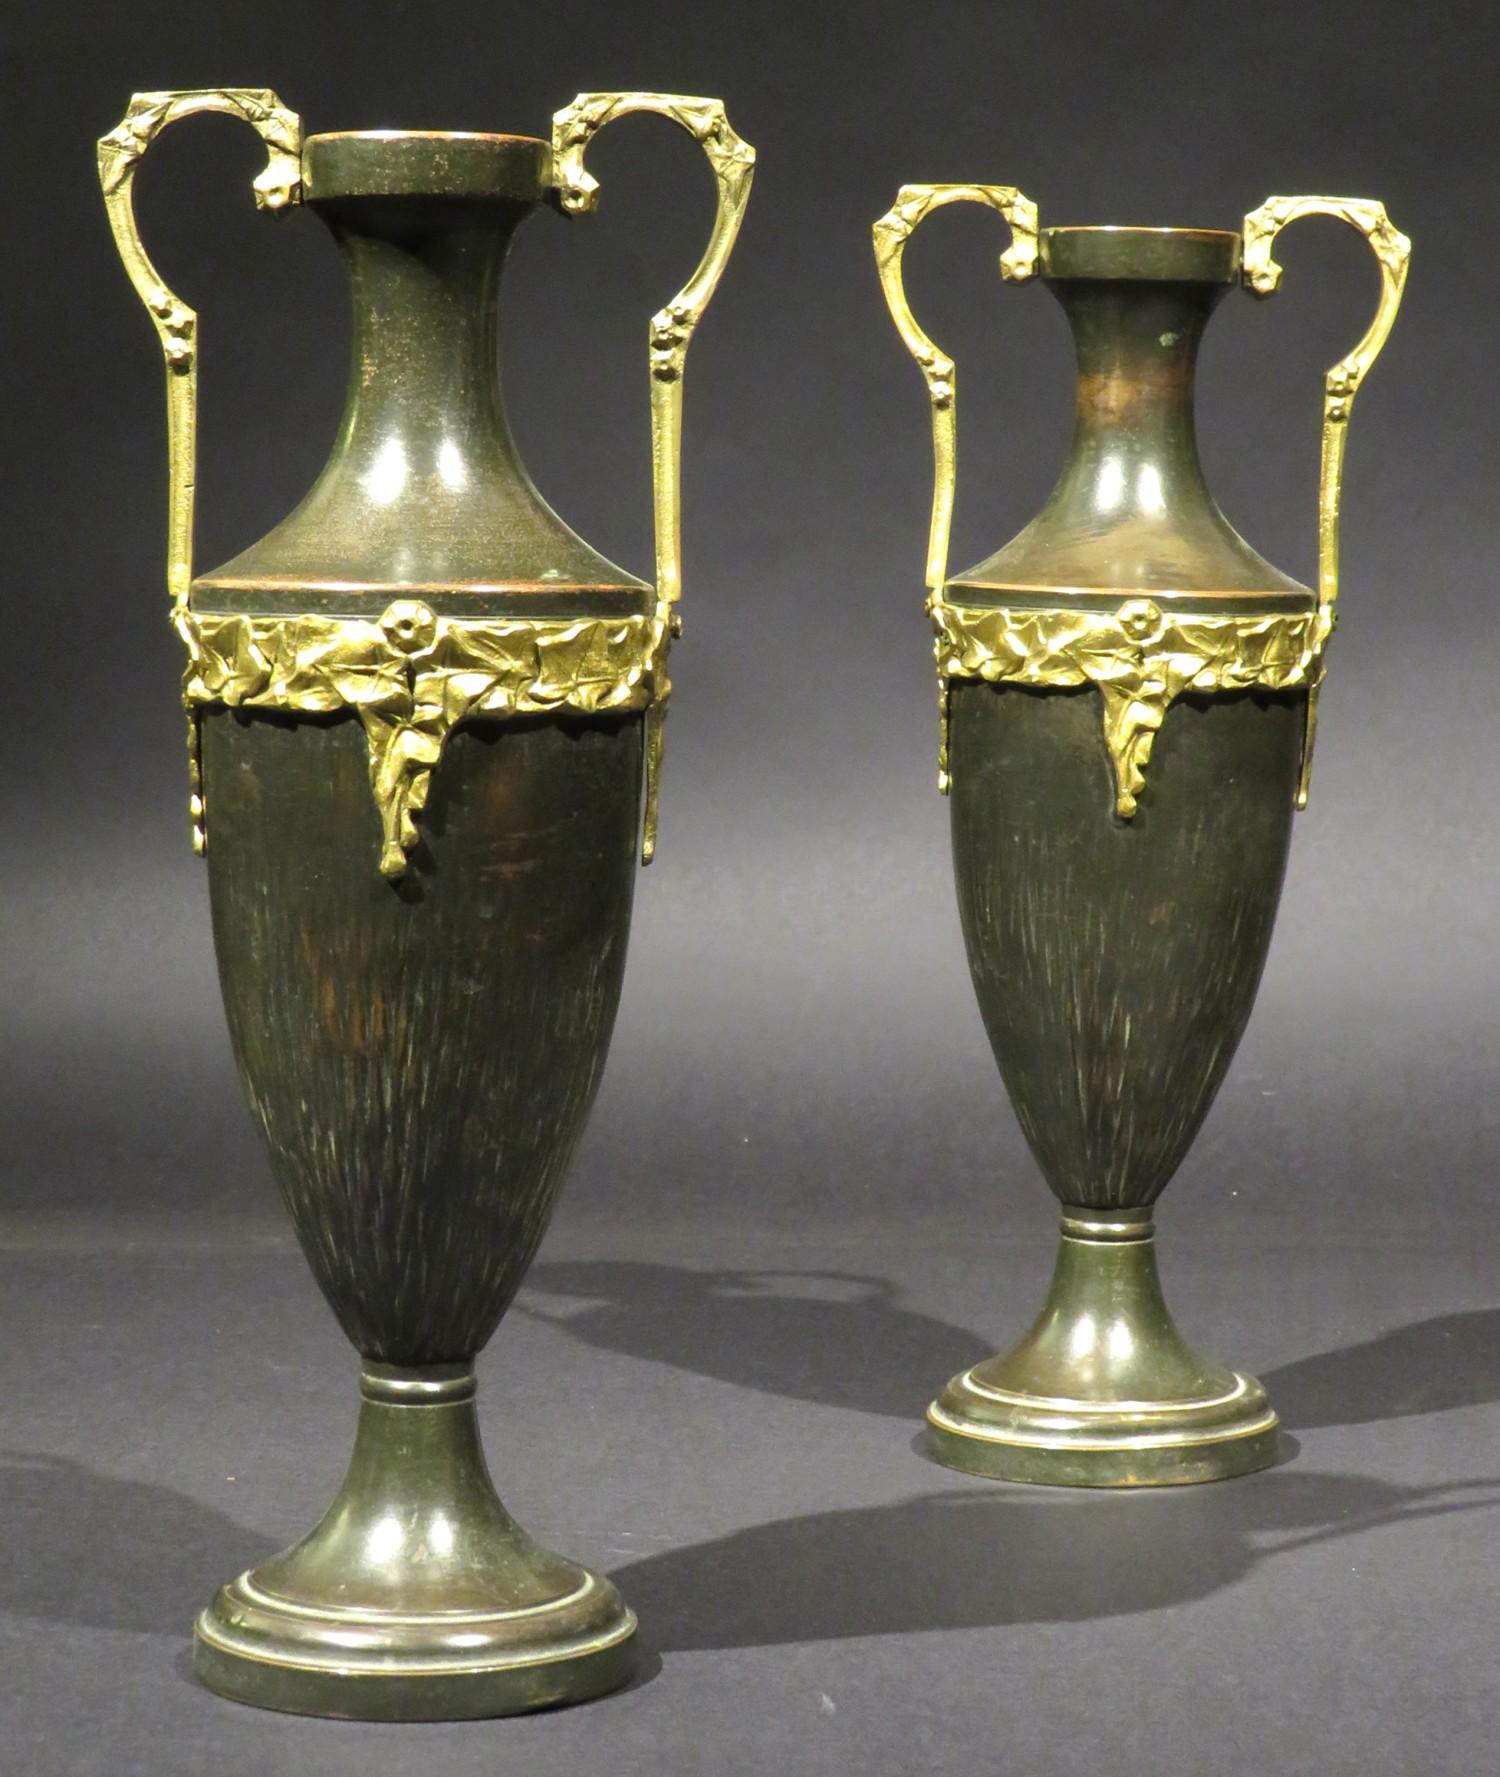 French Fine Pair of Neoclassical Revival Bronze Patinated Copper Urns, Circa 1900 For Sale